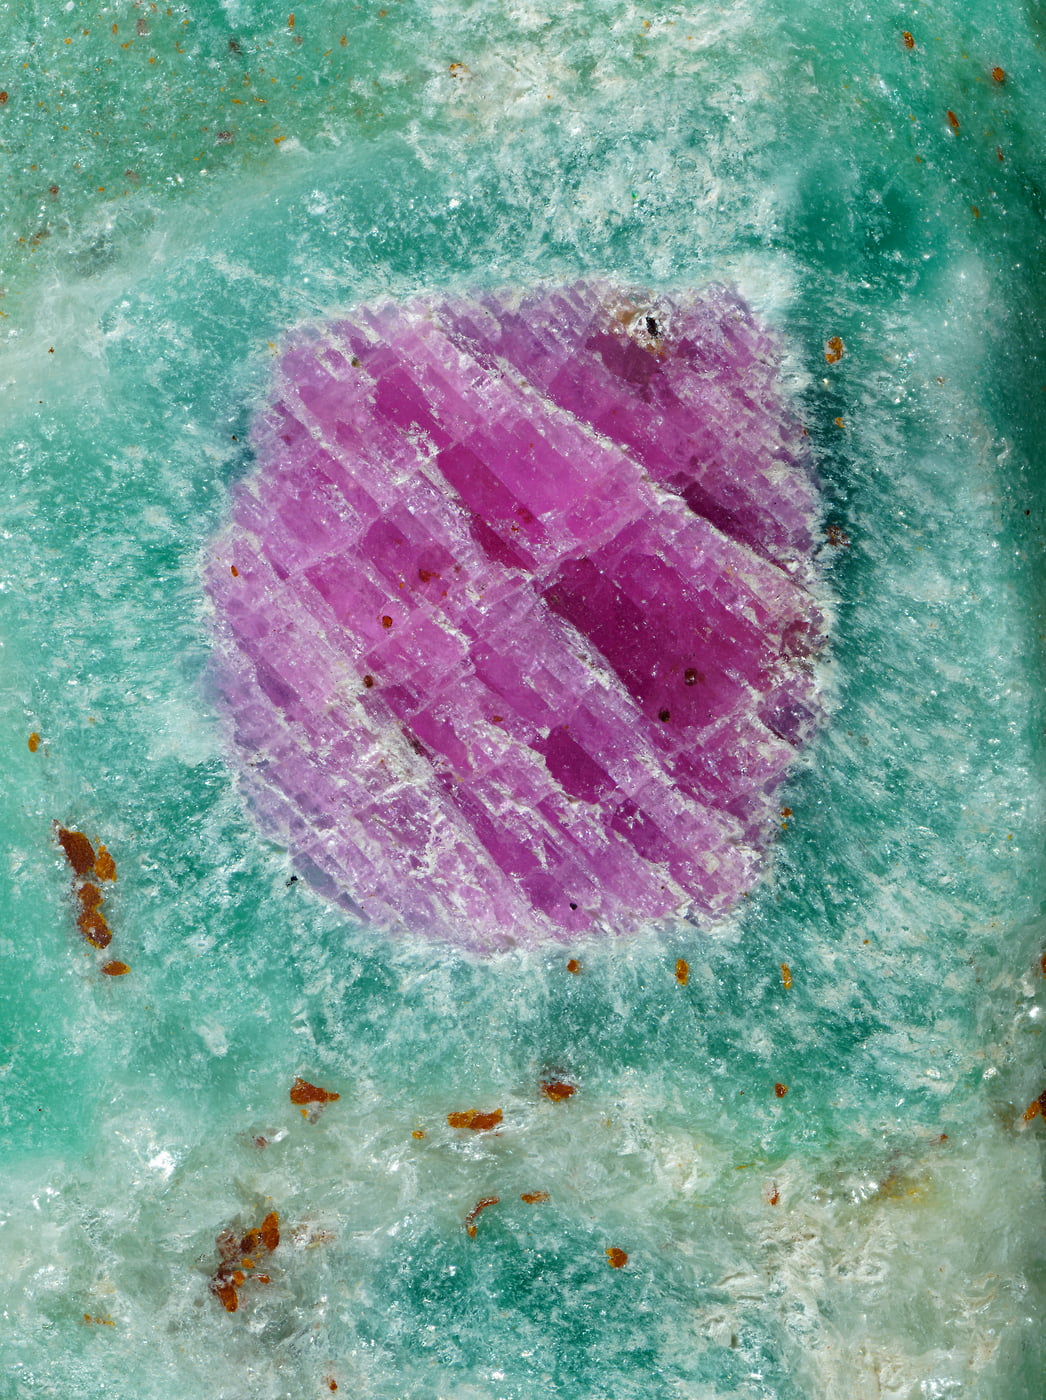 424 megapixels! A very high resolution photo of a gemstone; VAST photo and fine art print created by Steph Mantis.